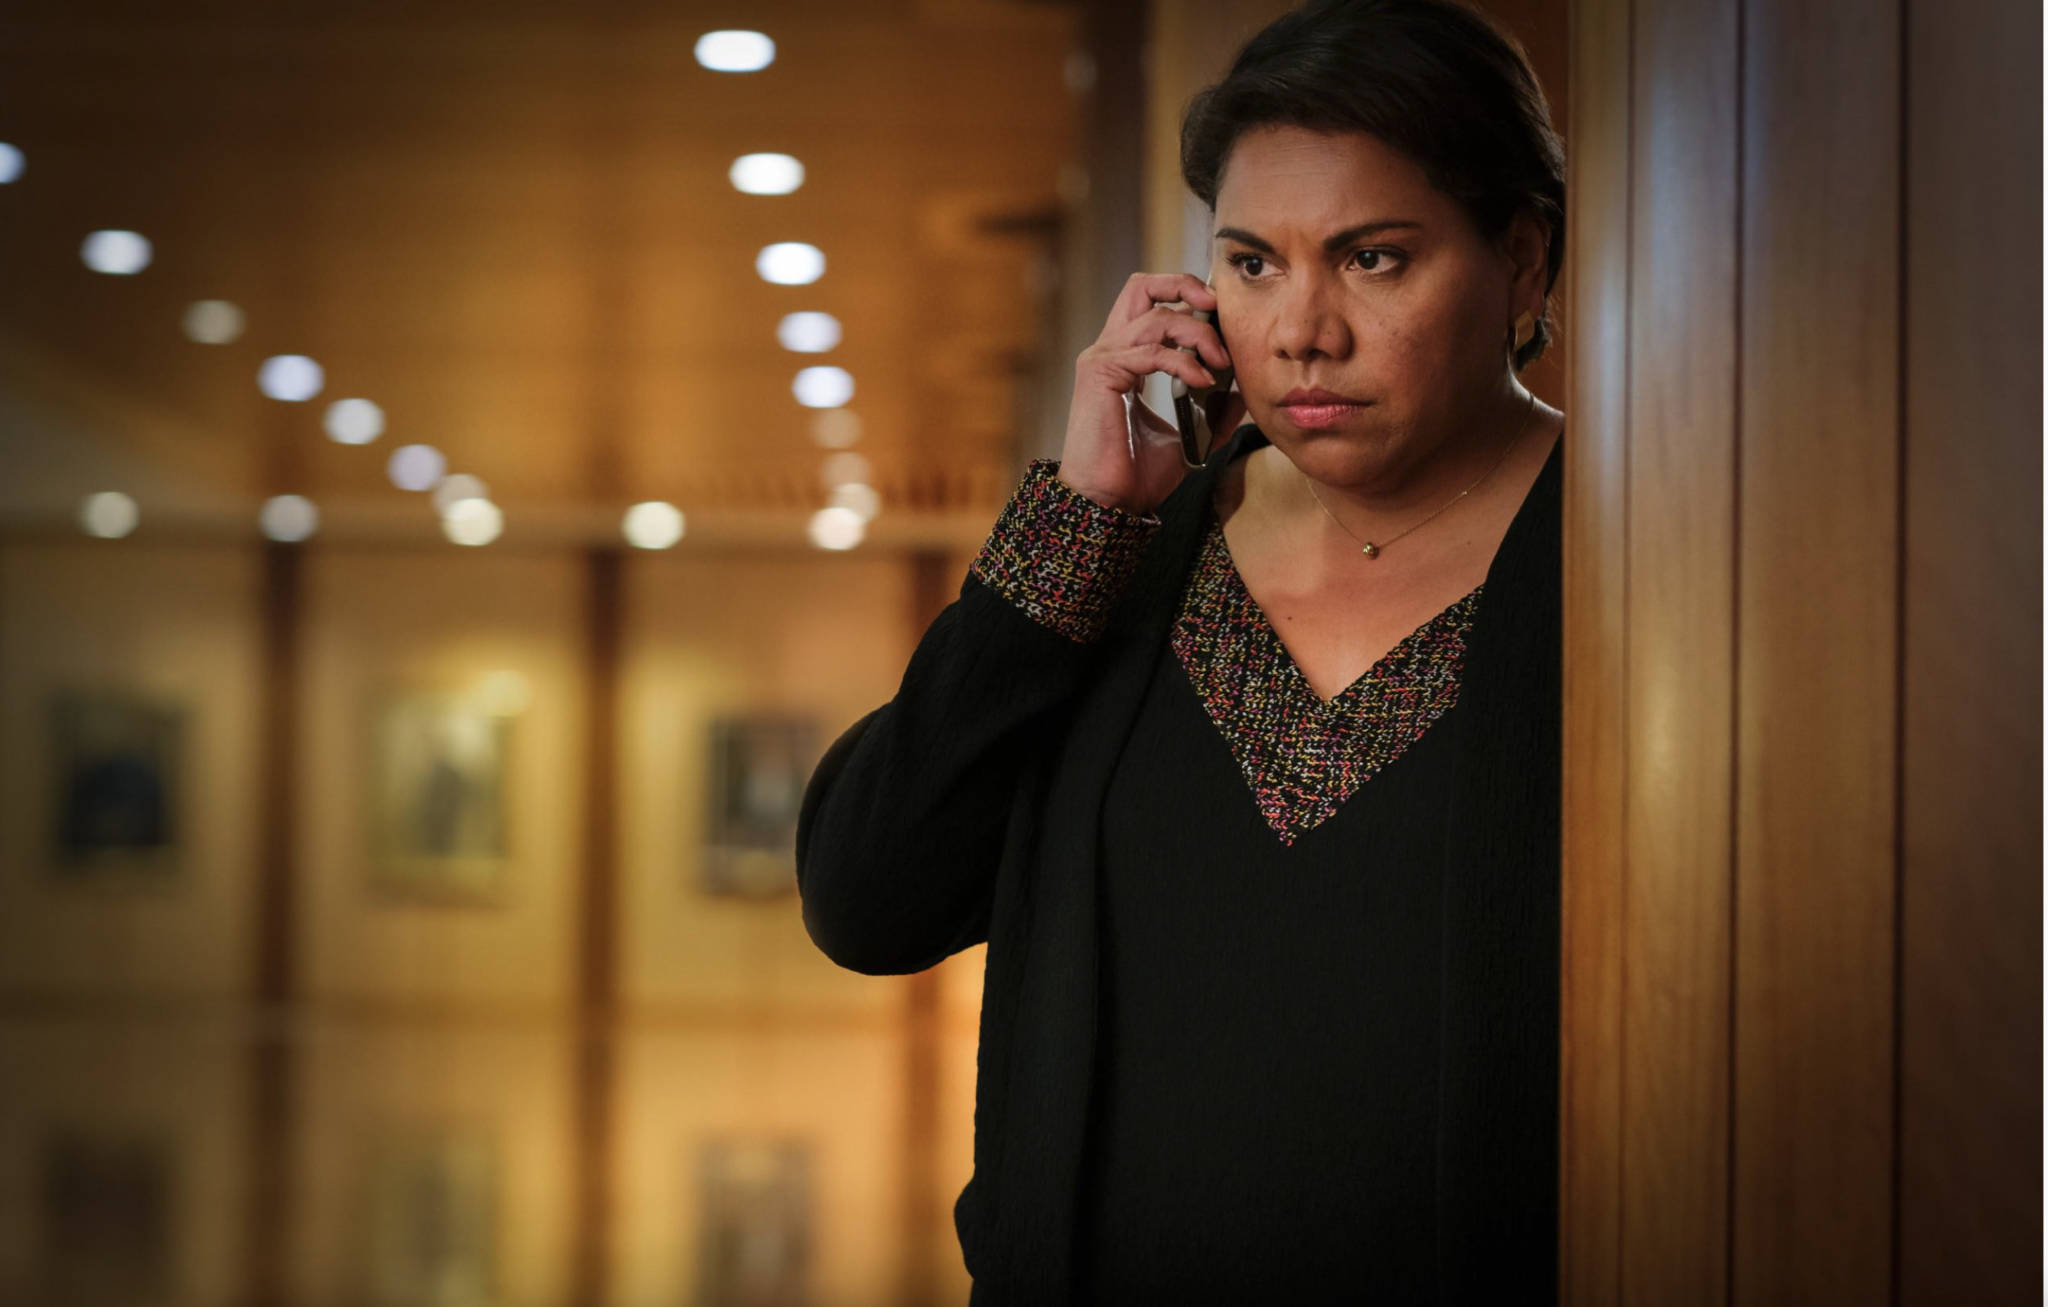 Deborah Mailman plays Alex Irving in TOTAL CONTROL. In the image she is looking series while on a phone call in a corridor